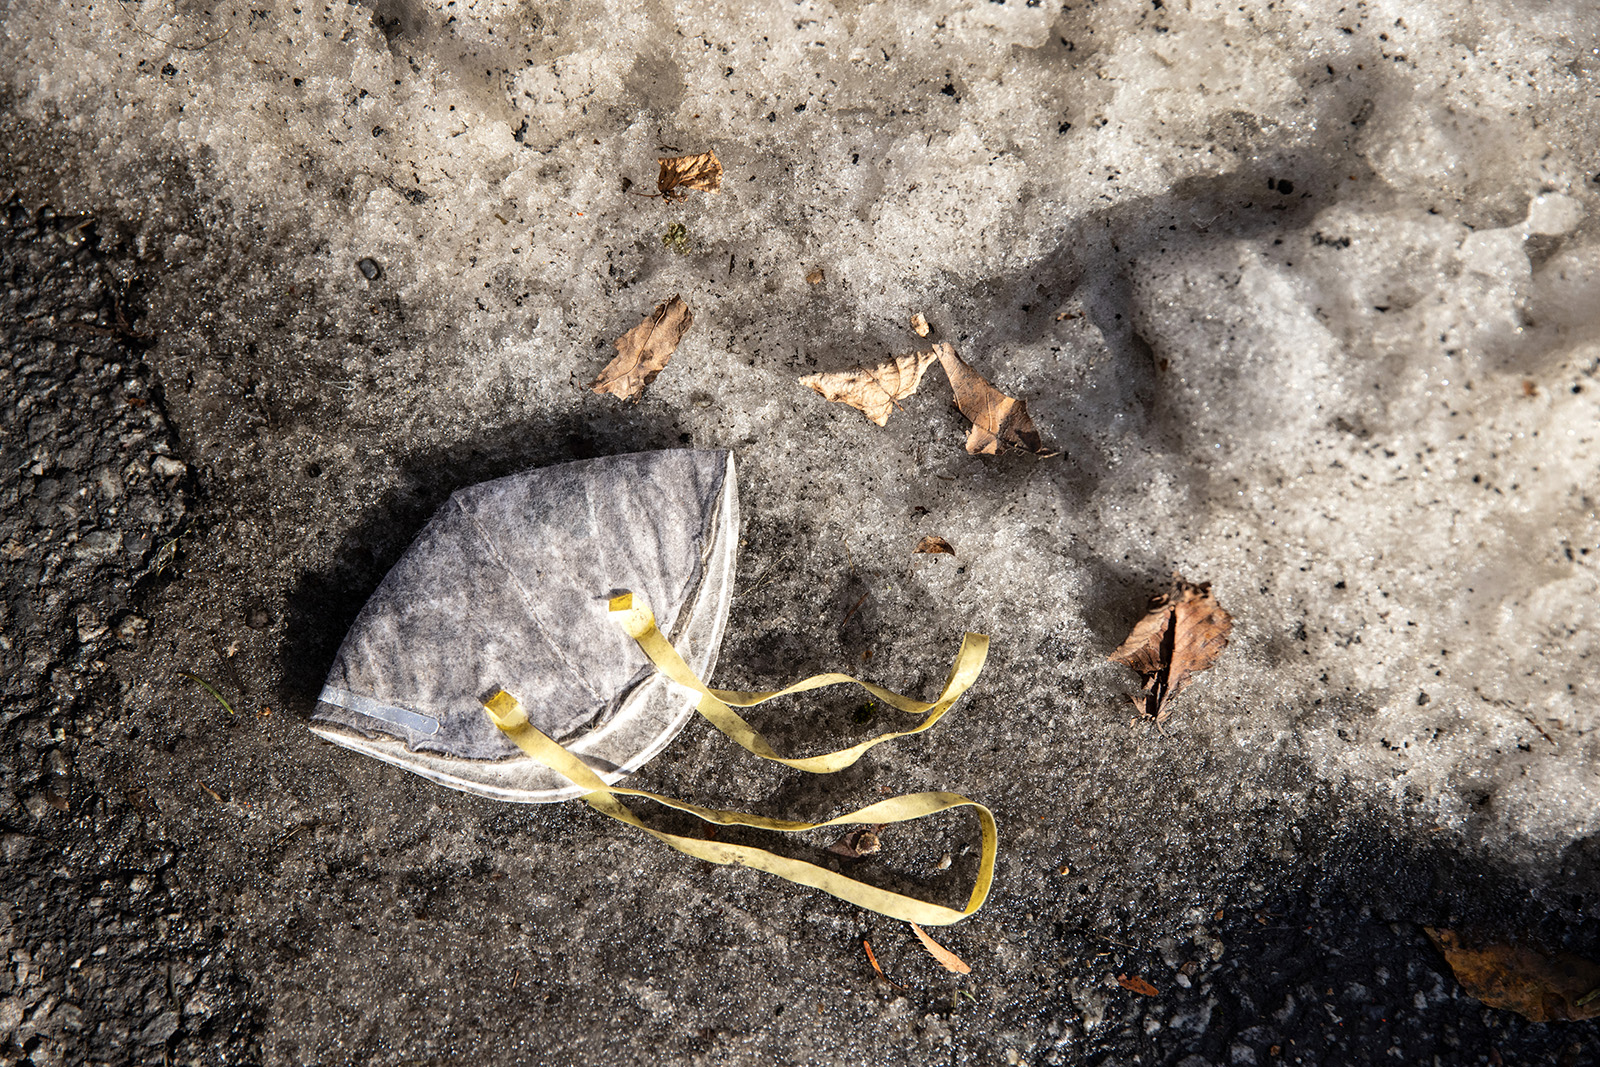 A mask lies in the snow outside an apartment building on December 23, 2020 in White Plains, New York.